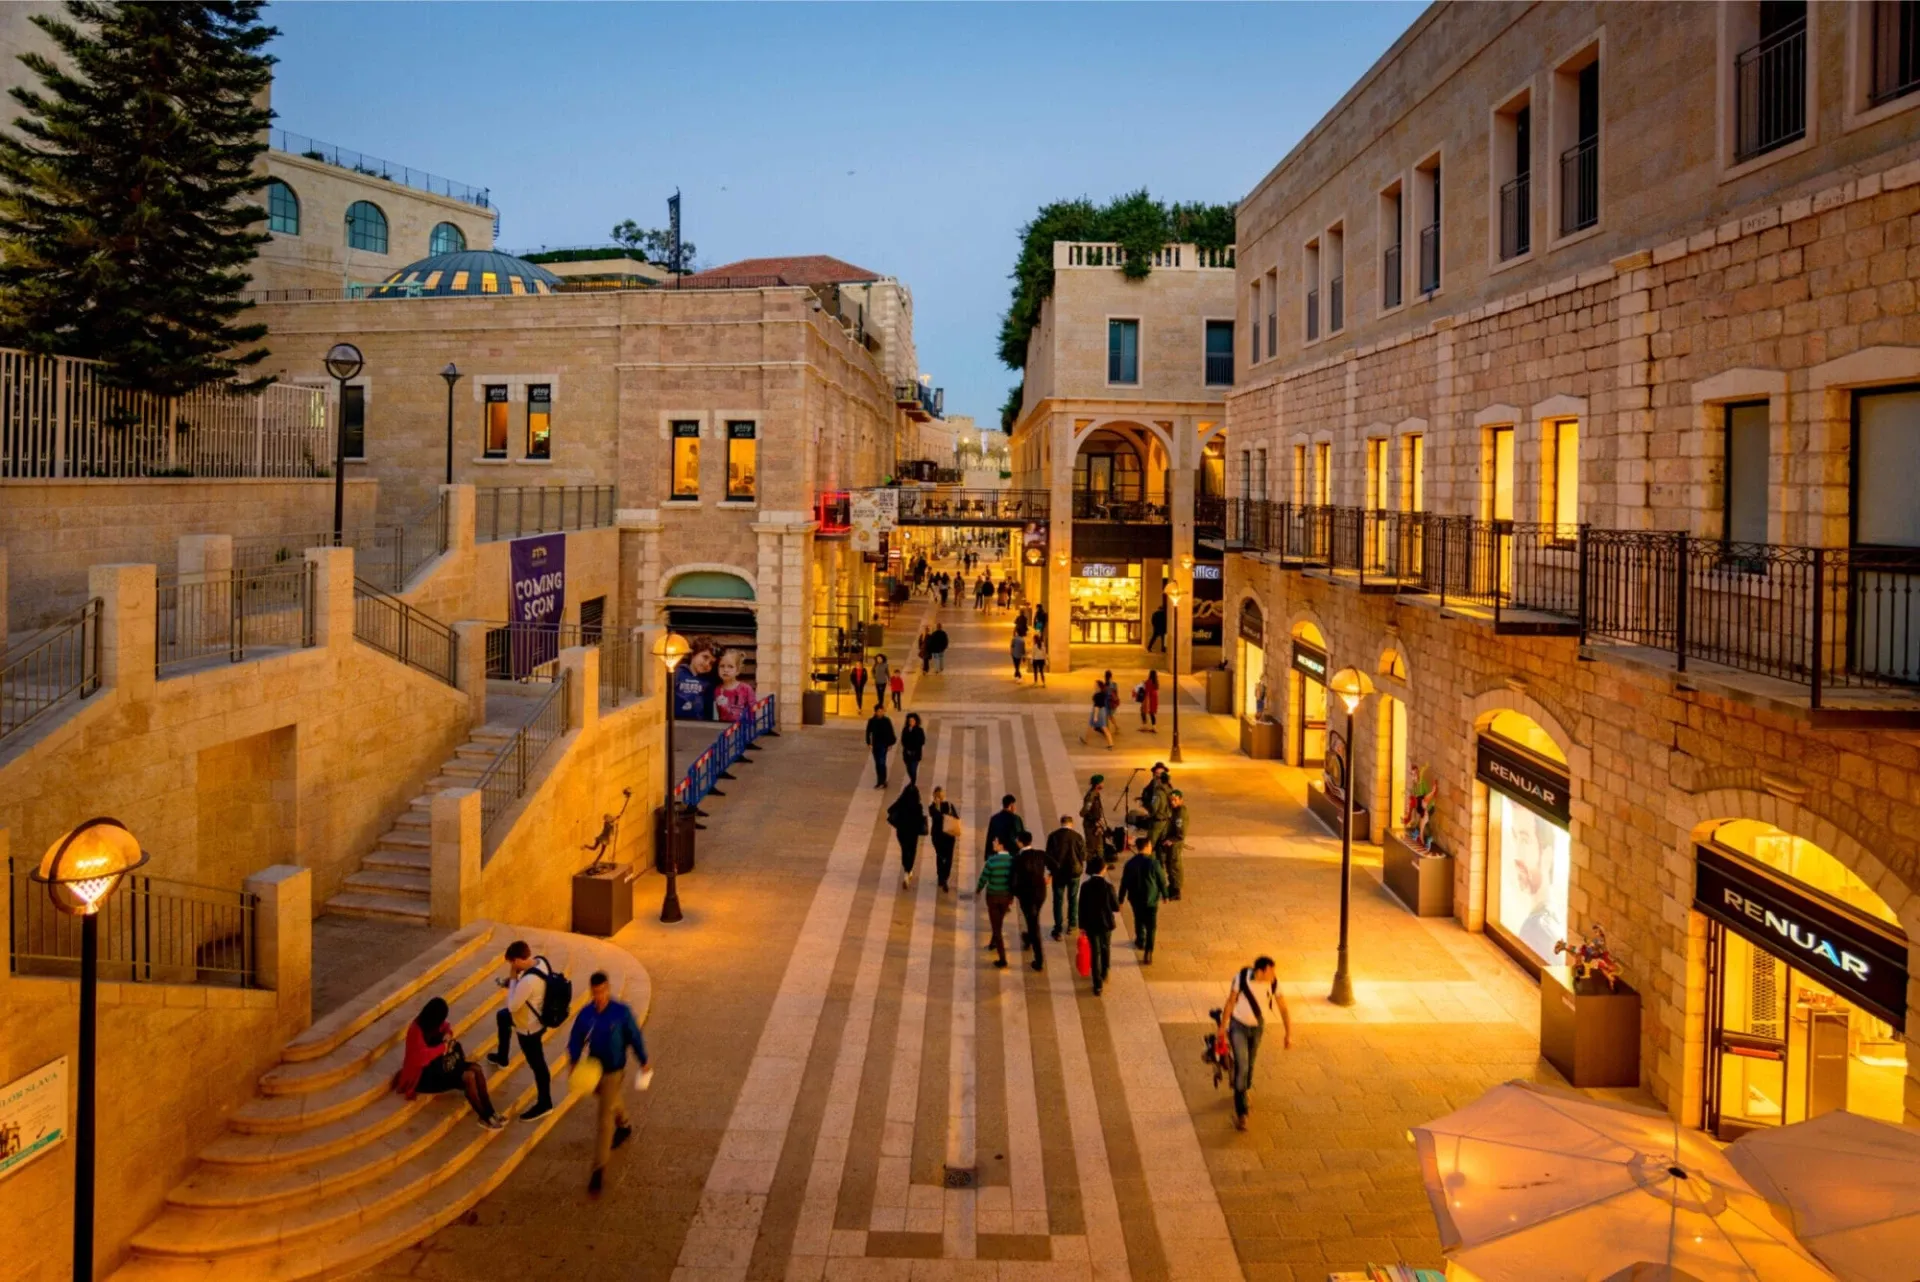 Mamilla Mall in Israel, middle_east | Fragrance,Shoes,Souvenirs,Accessories,Clothes,Natural Beauty Products,Cosmetics,Watches,Jewelry - Country Helper